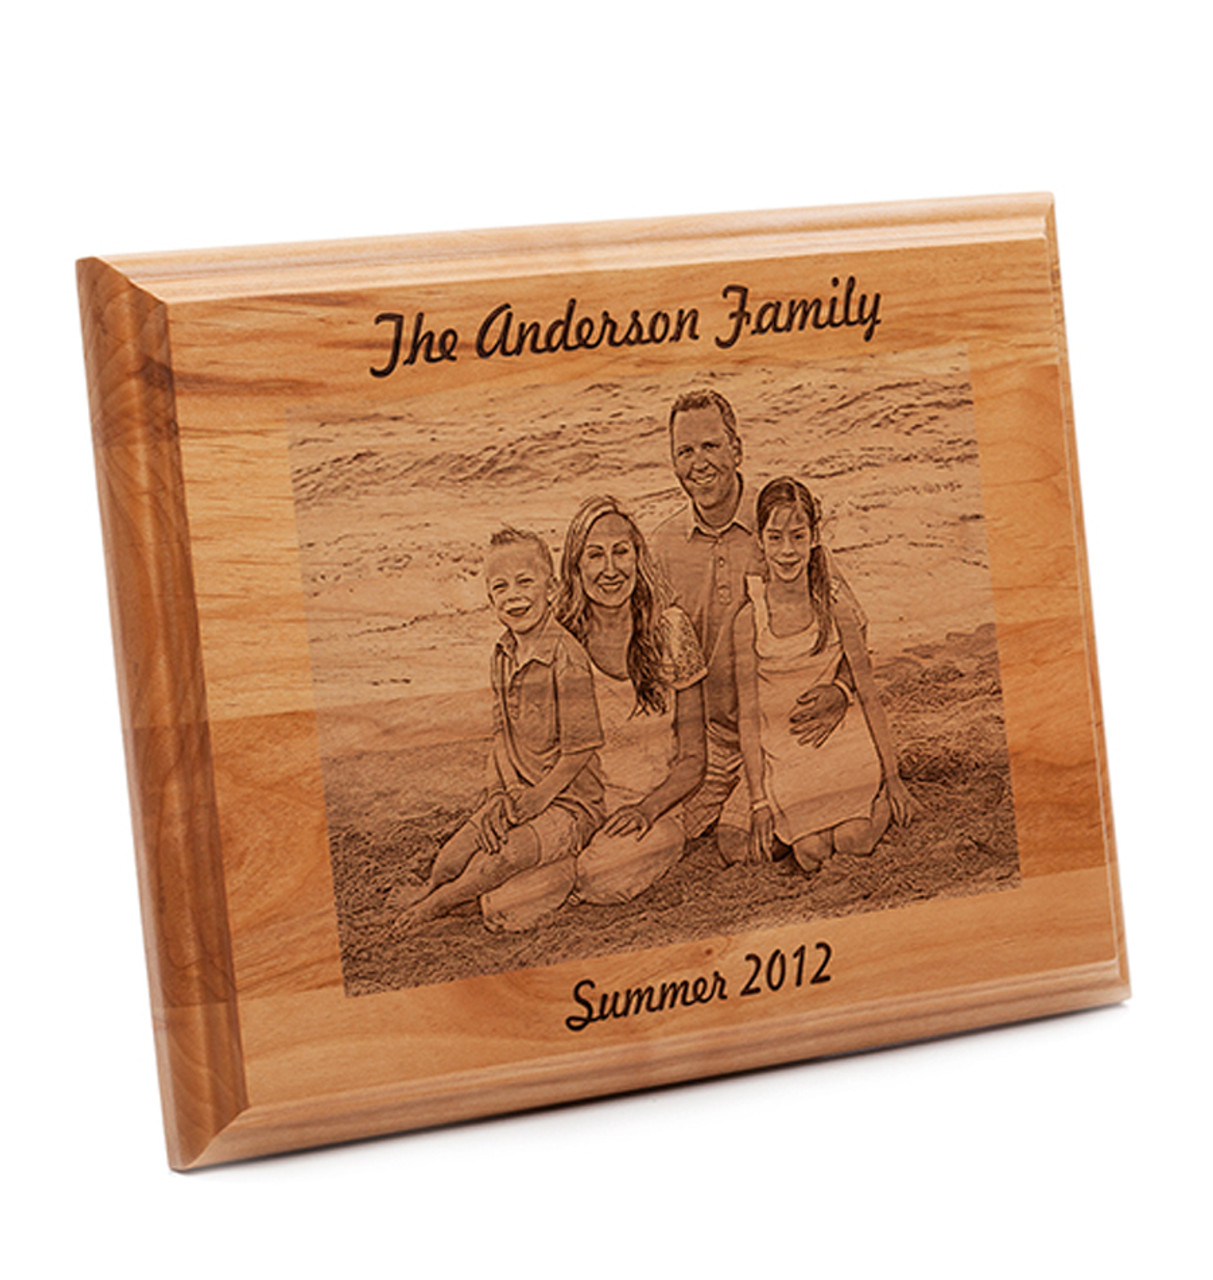 https://cdn11.bigcommerce.com/s-4yrh00uh/images/stencil/1280x1280/products/83/311/Wood_Photo_Plaque_Family_Main__08848.1434755748.jpg?c=2